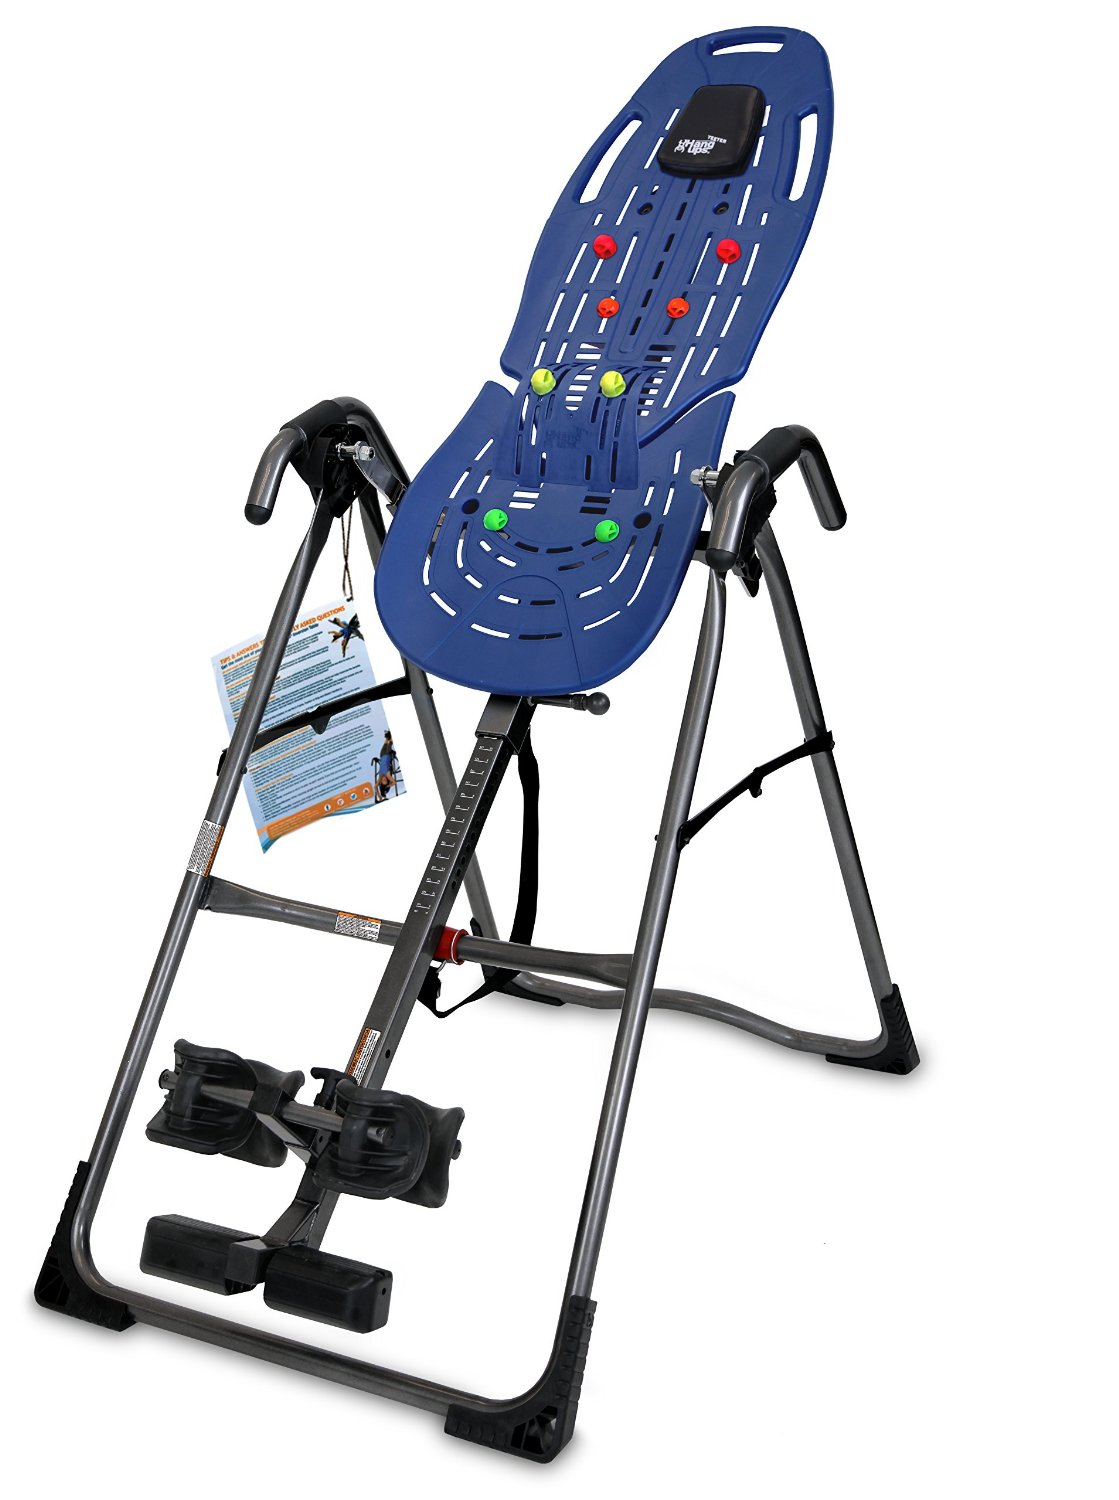 Teeter EP-560 Ltd. Inversion Table with Back Pain Relief Kit for only